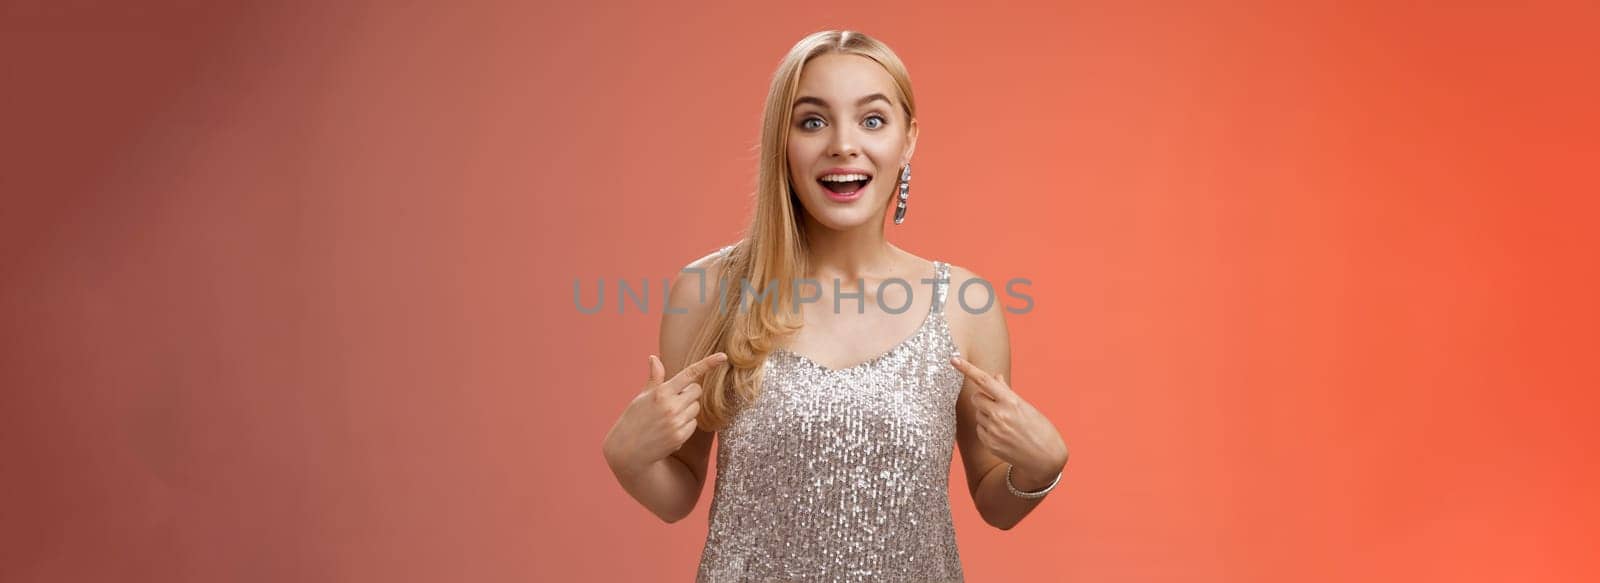 Surprised wondered happy blond charming cheerful woman in glittering silver dress pointing herself amused thrilled picked be chosen participate awesome event, standing joyful red background.